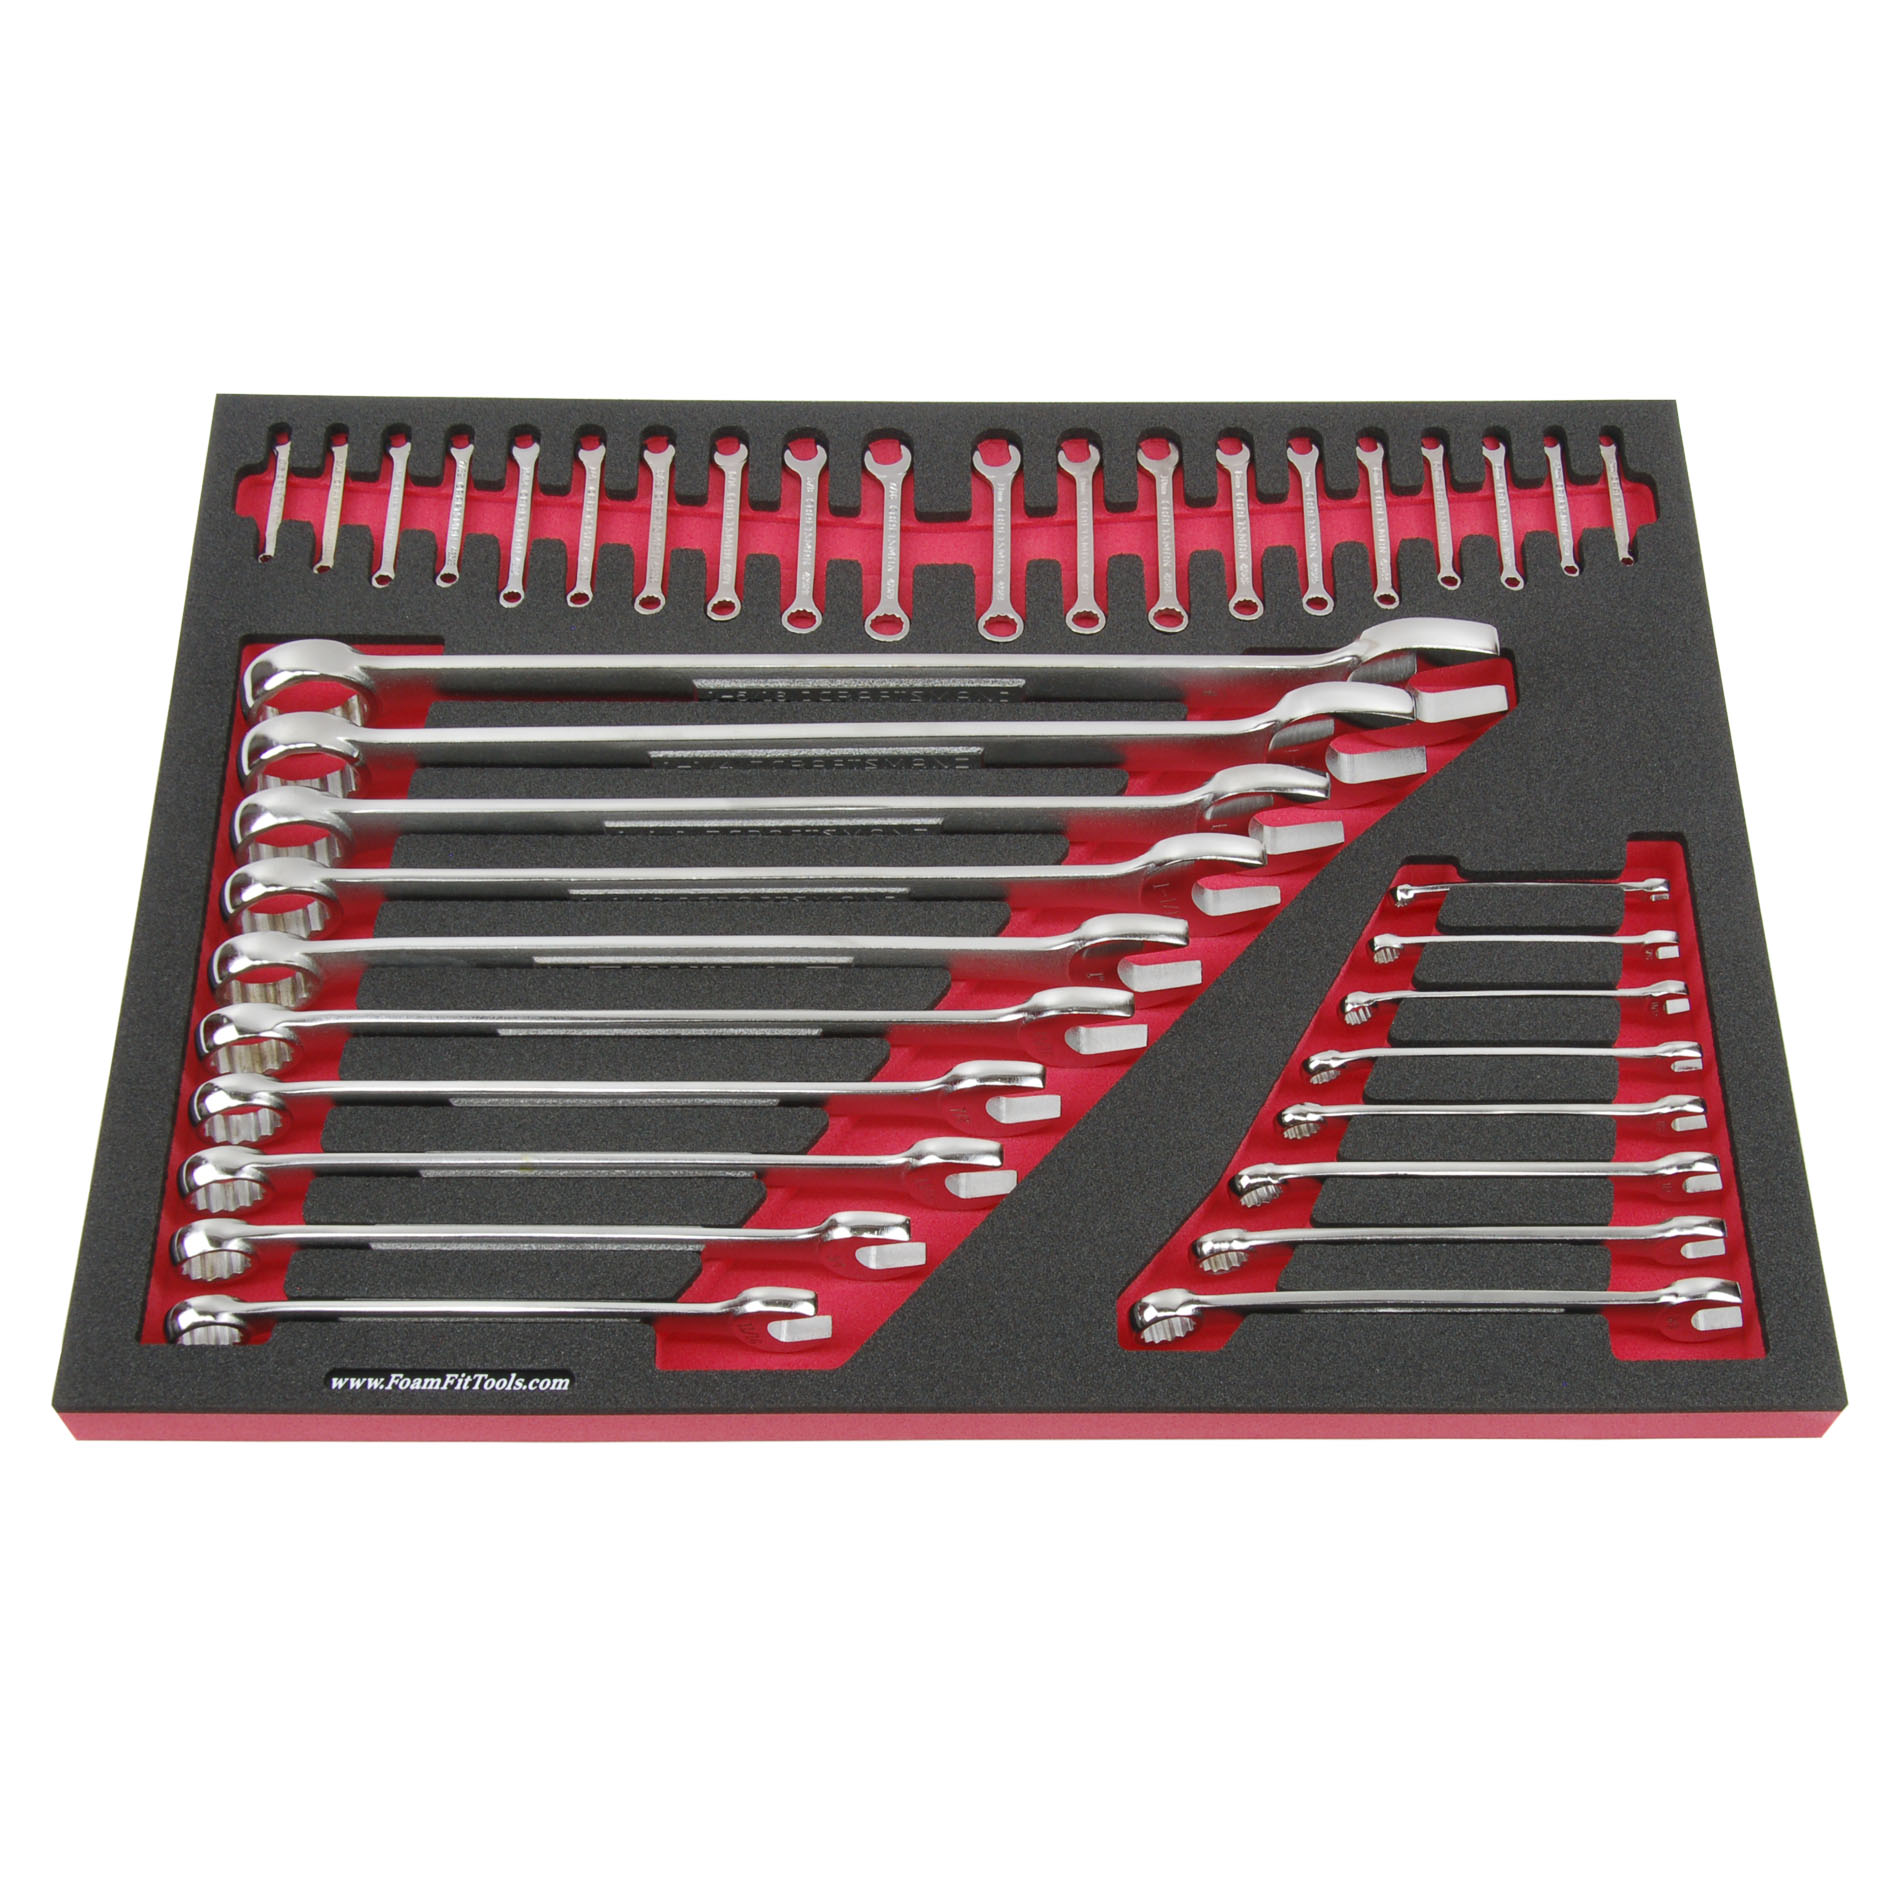 CRAFTSMAN Plastic Wrench Storage 12-slot Wrench Organizer in the